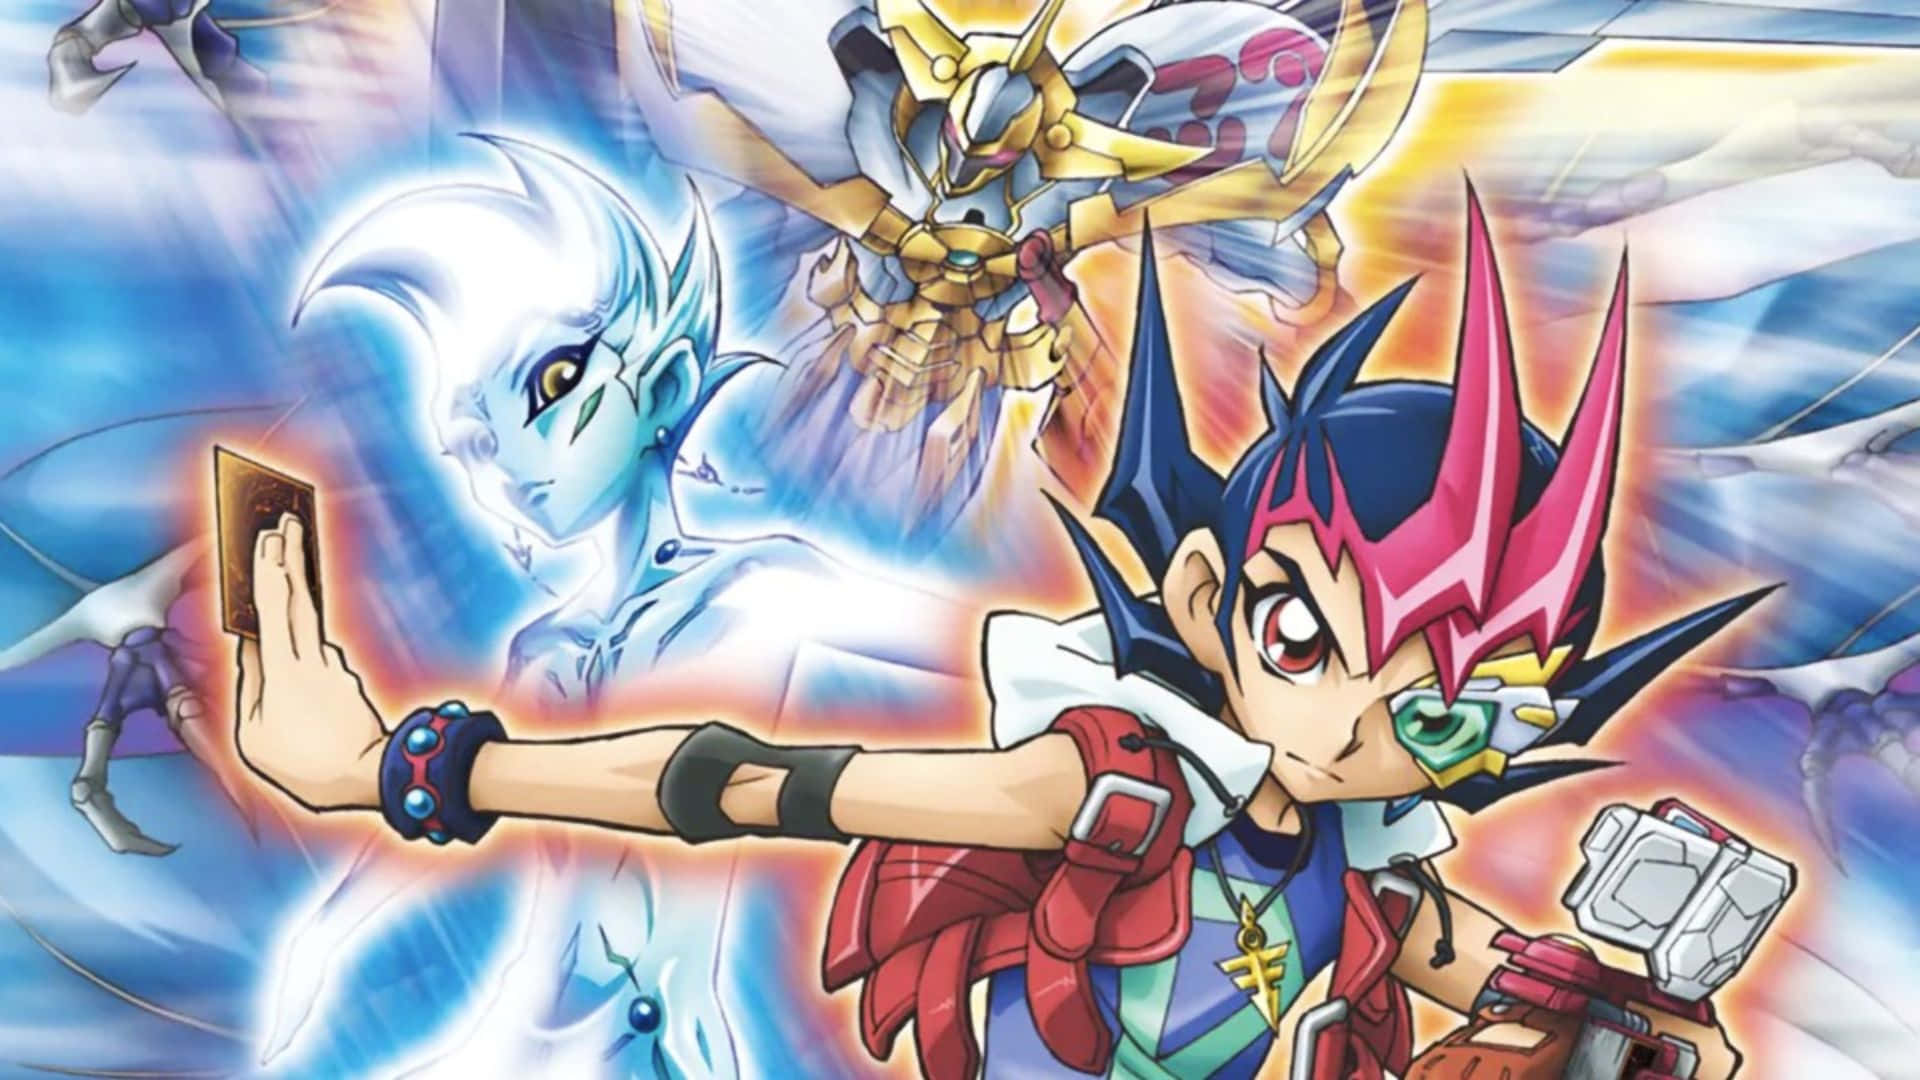 Yu-Gi-Oh! Astral character and his monsters in action Wallpaper